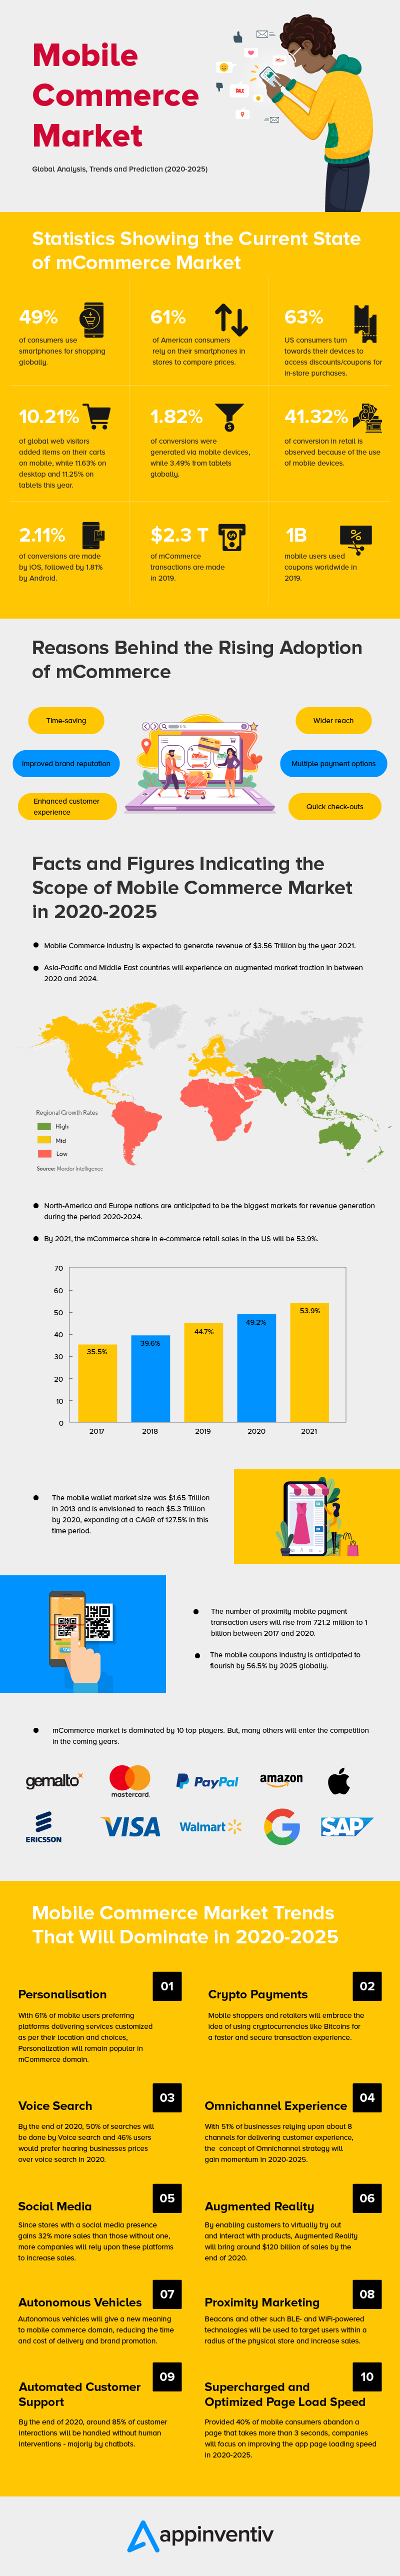 Mobile Commerce Market in 2020-2025 #infographic